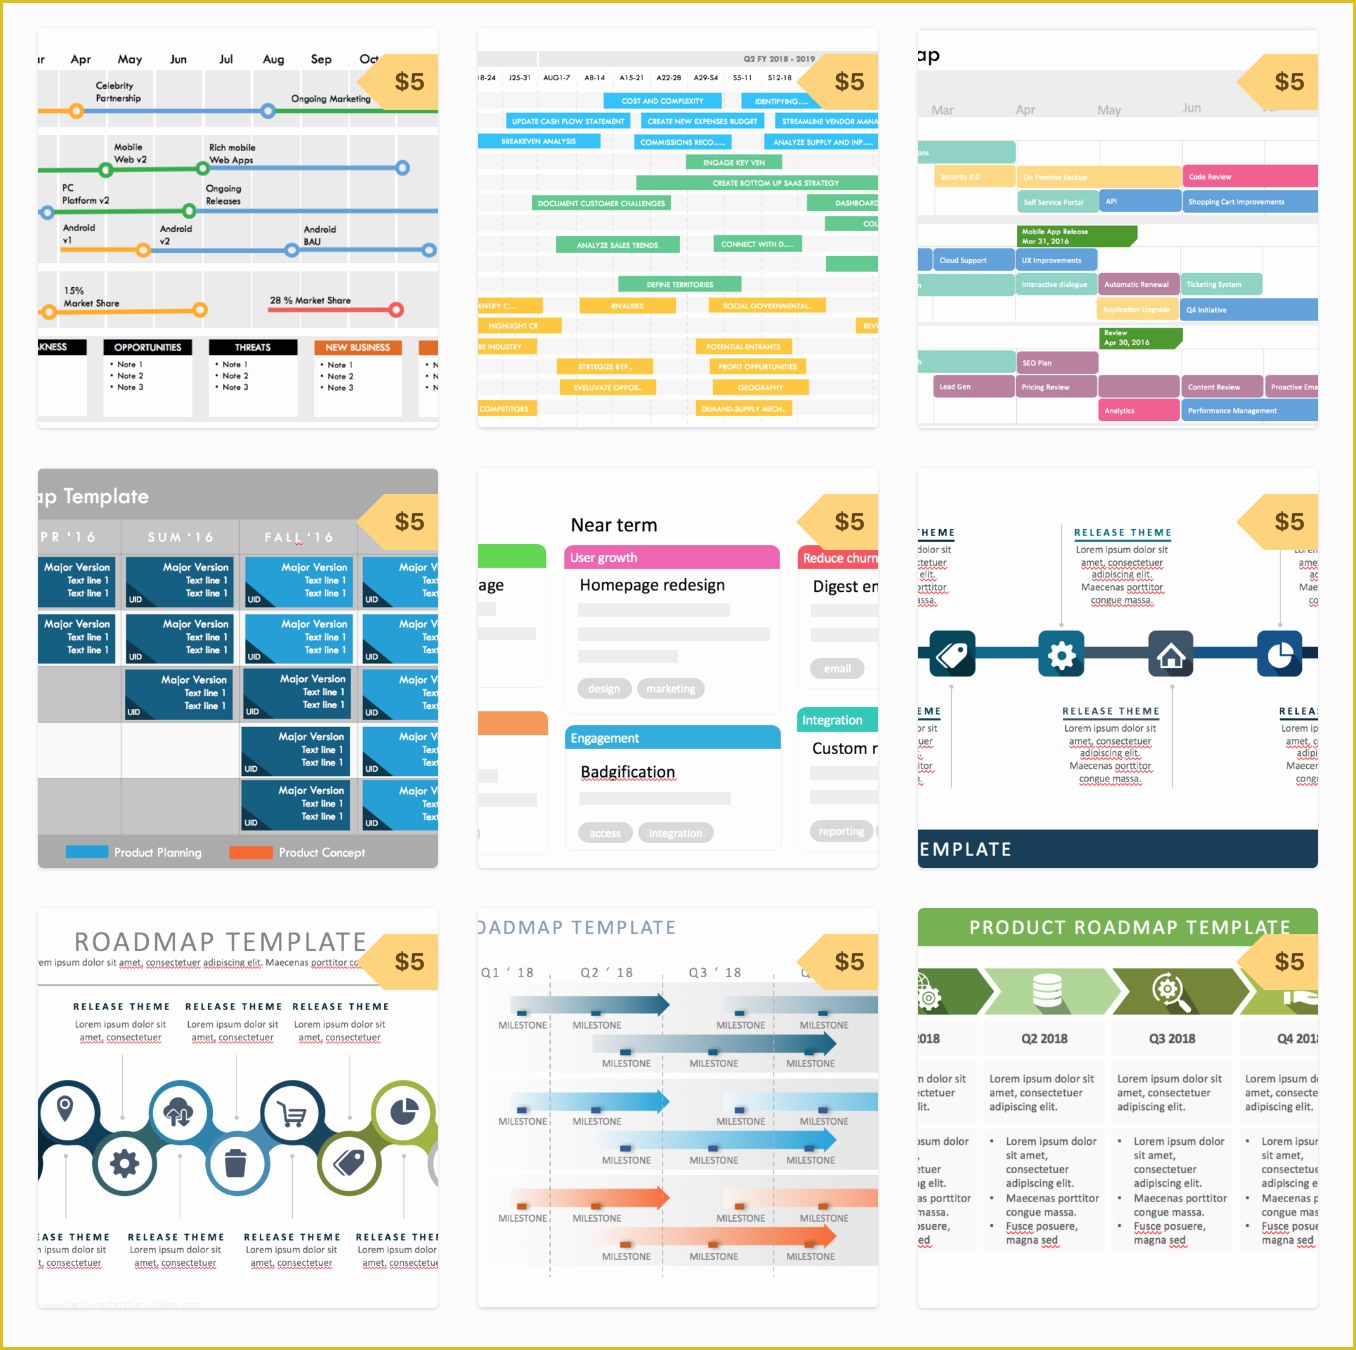 Free Product Roadmap Template Excel Of Excel Product Roadmap Templates Xls Professionally